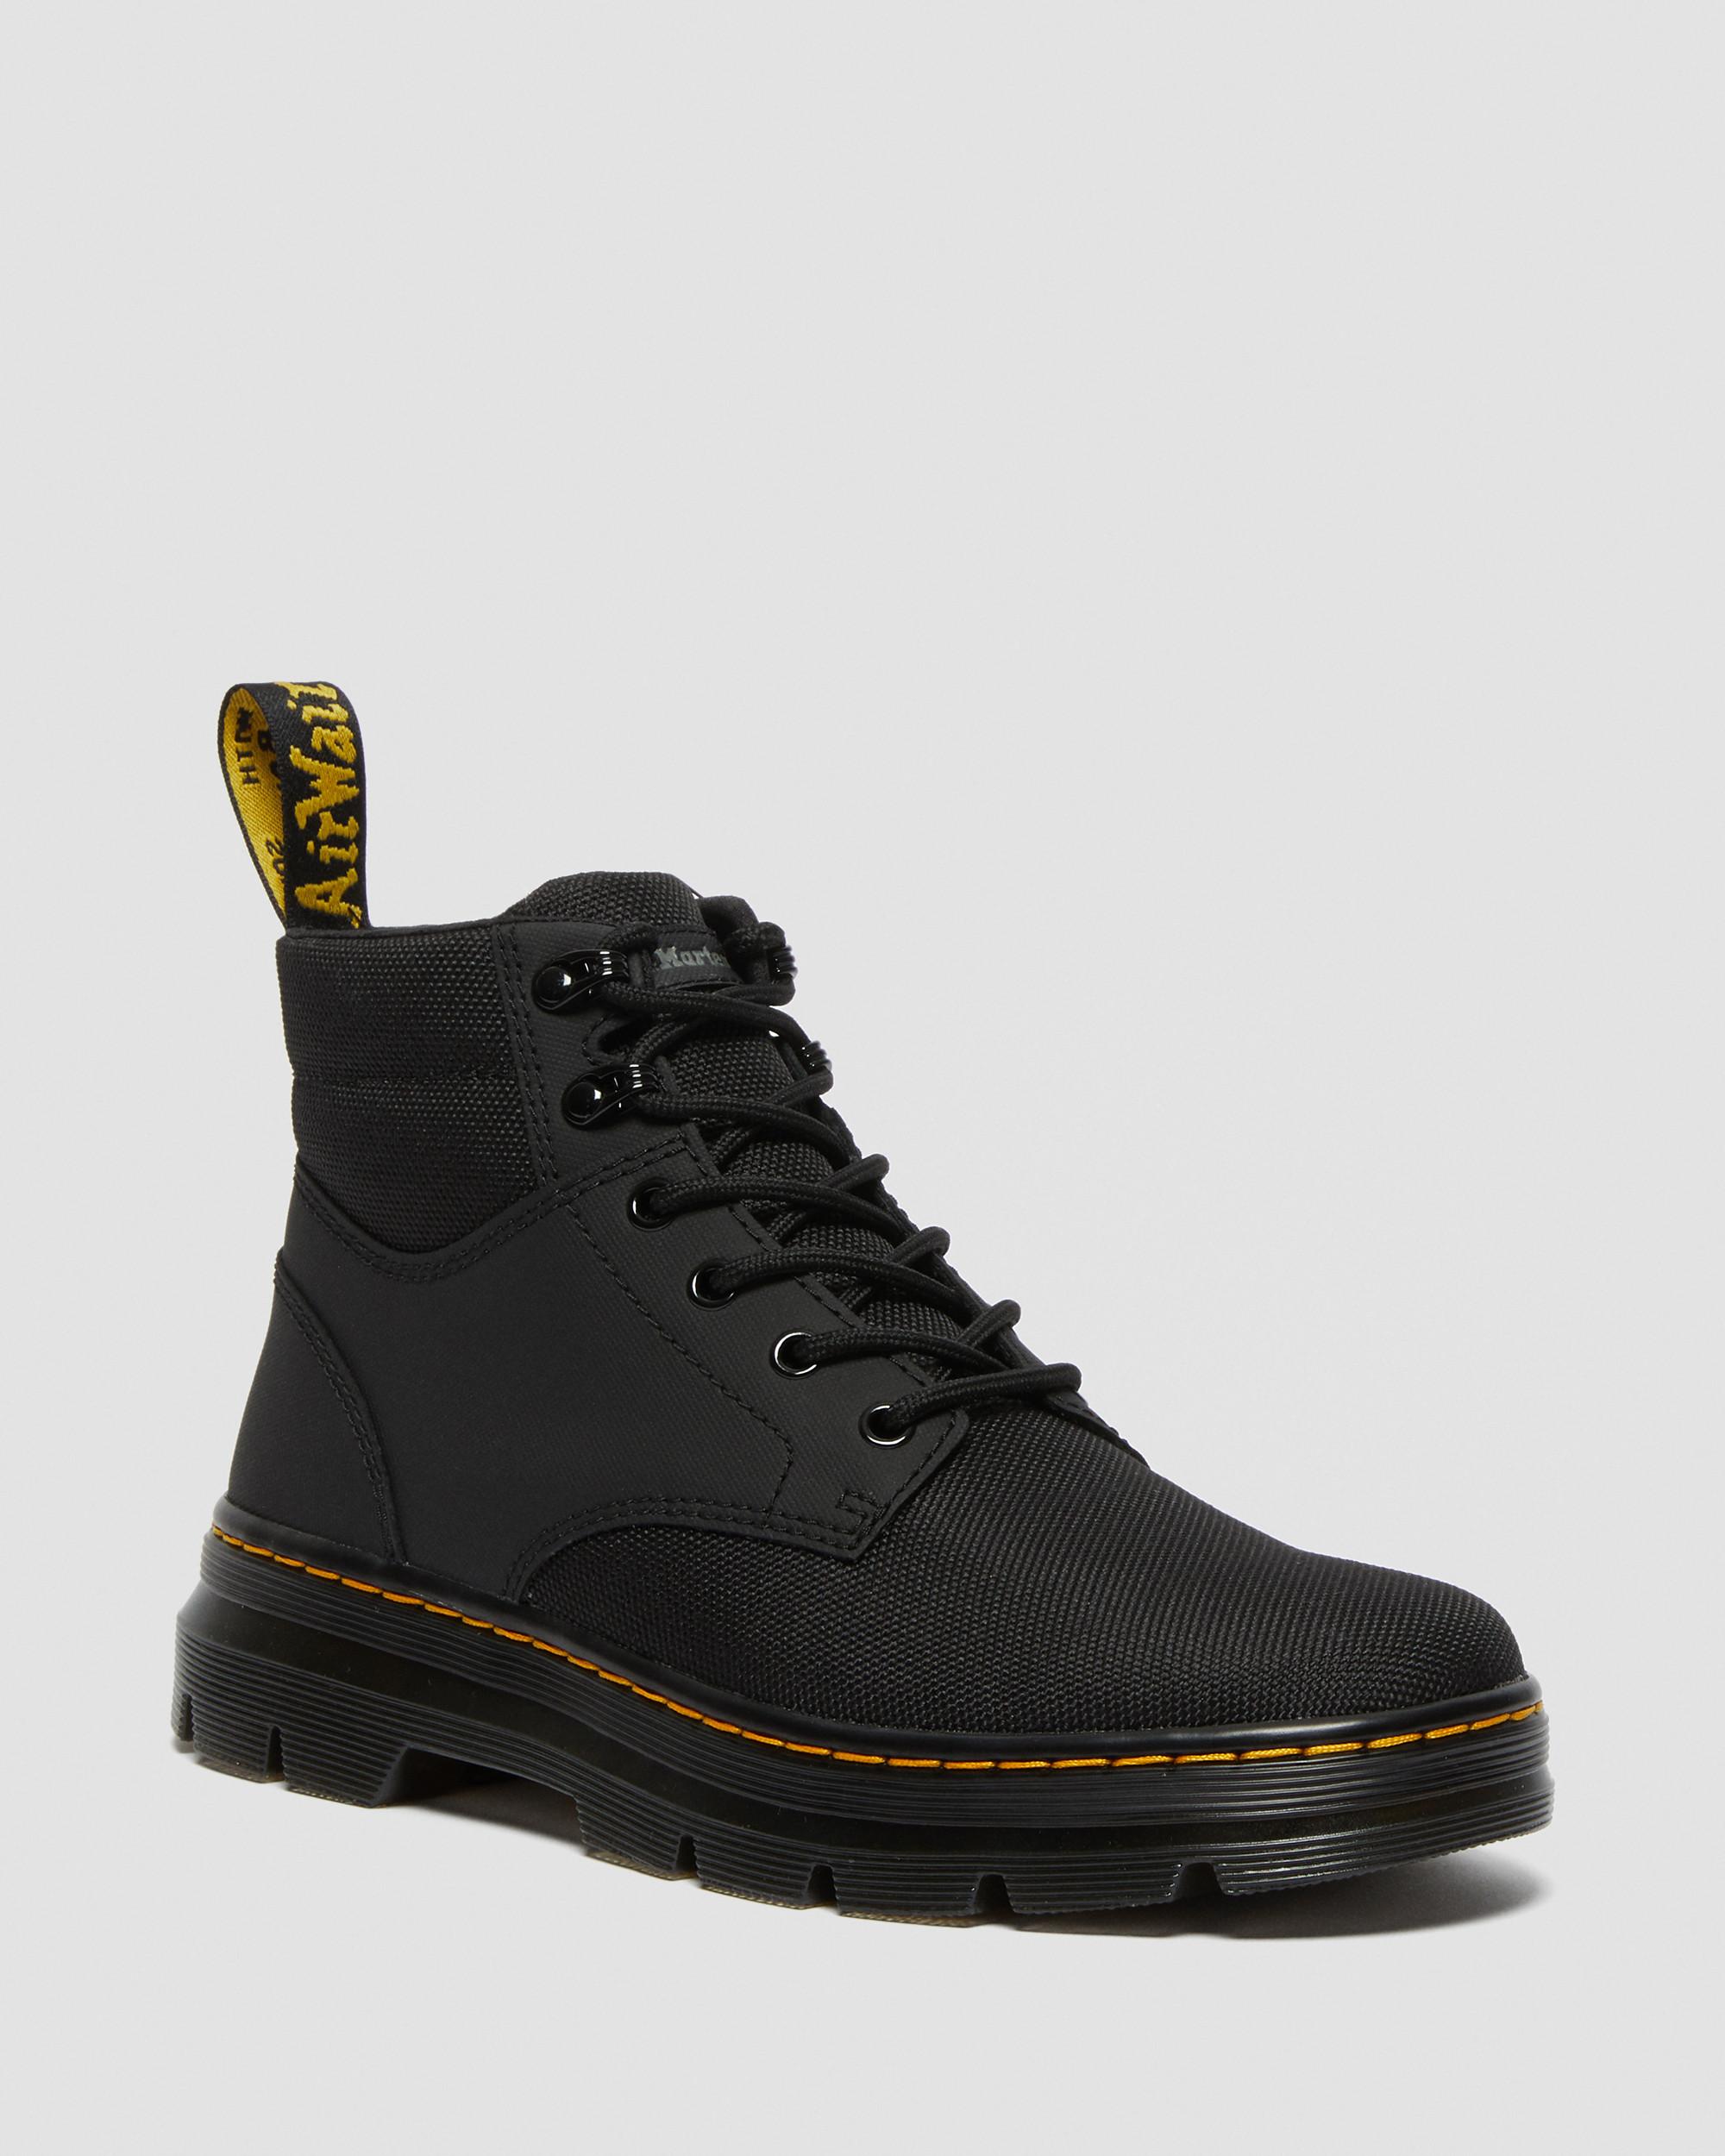 Find Dr. Martens on Sale and Pay Less for Your Favorite Cool Kicks